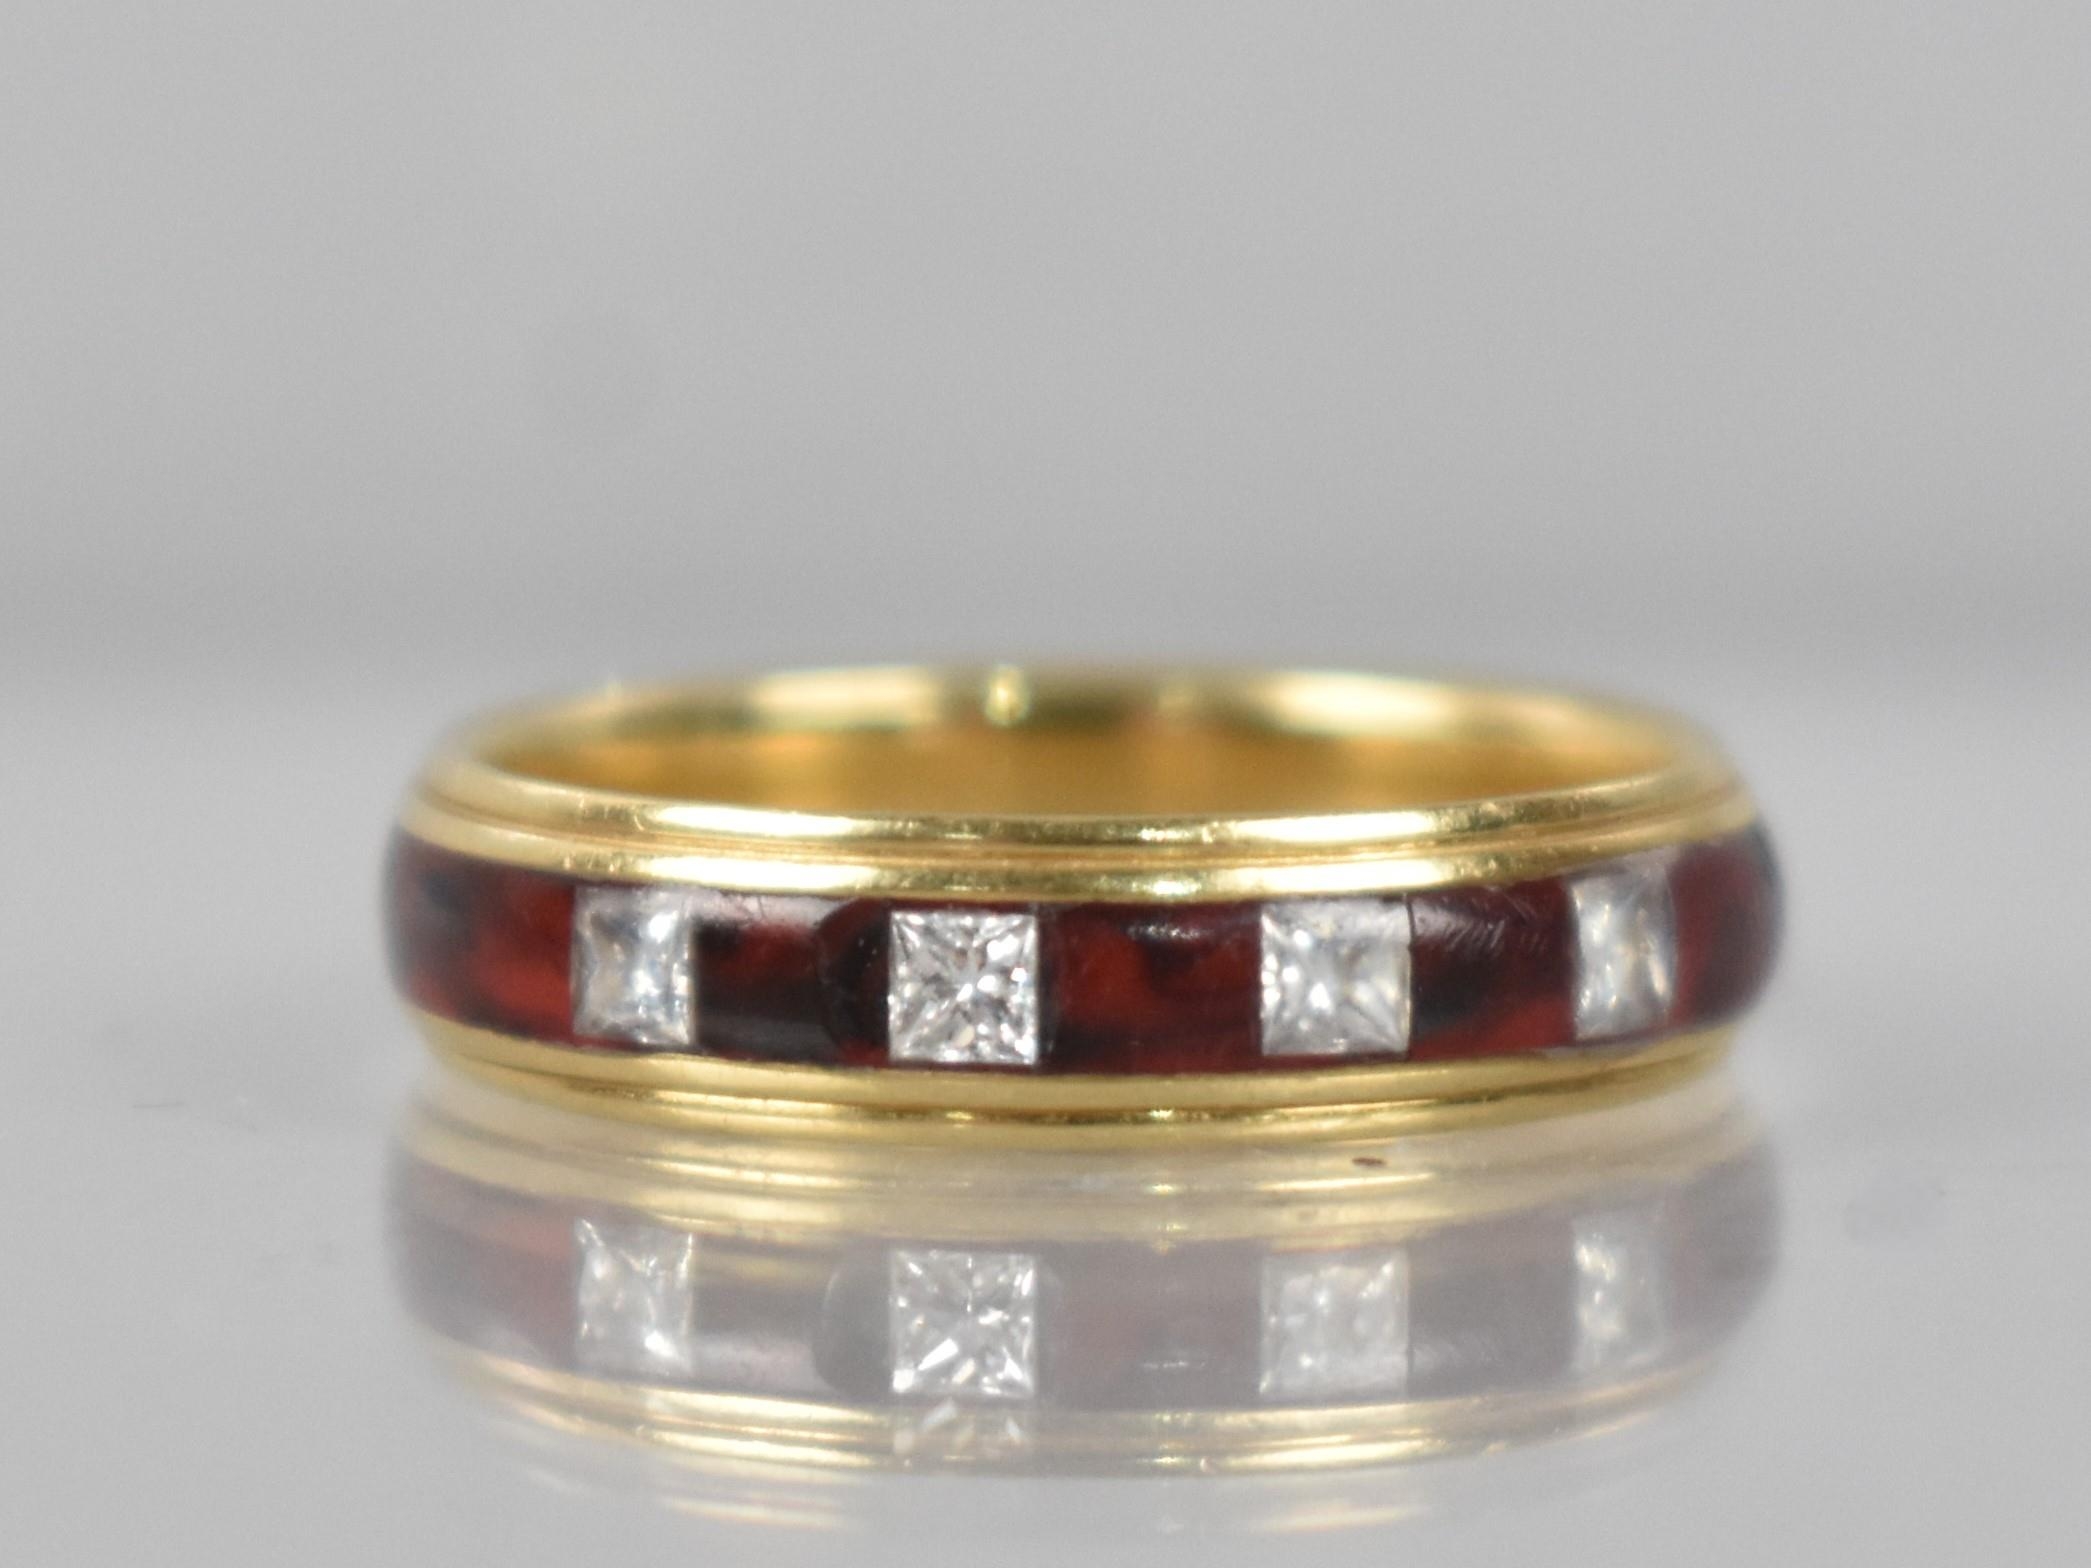 An 18ct Gold, Diamond and Enamel Ring, Four Square Cut Diamonds (1.7mm Square) in Marbled Red Enamel